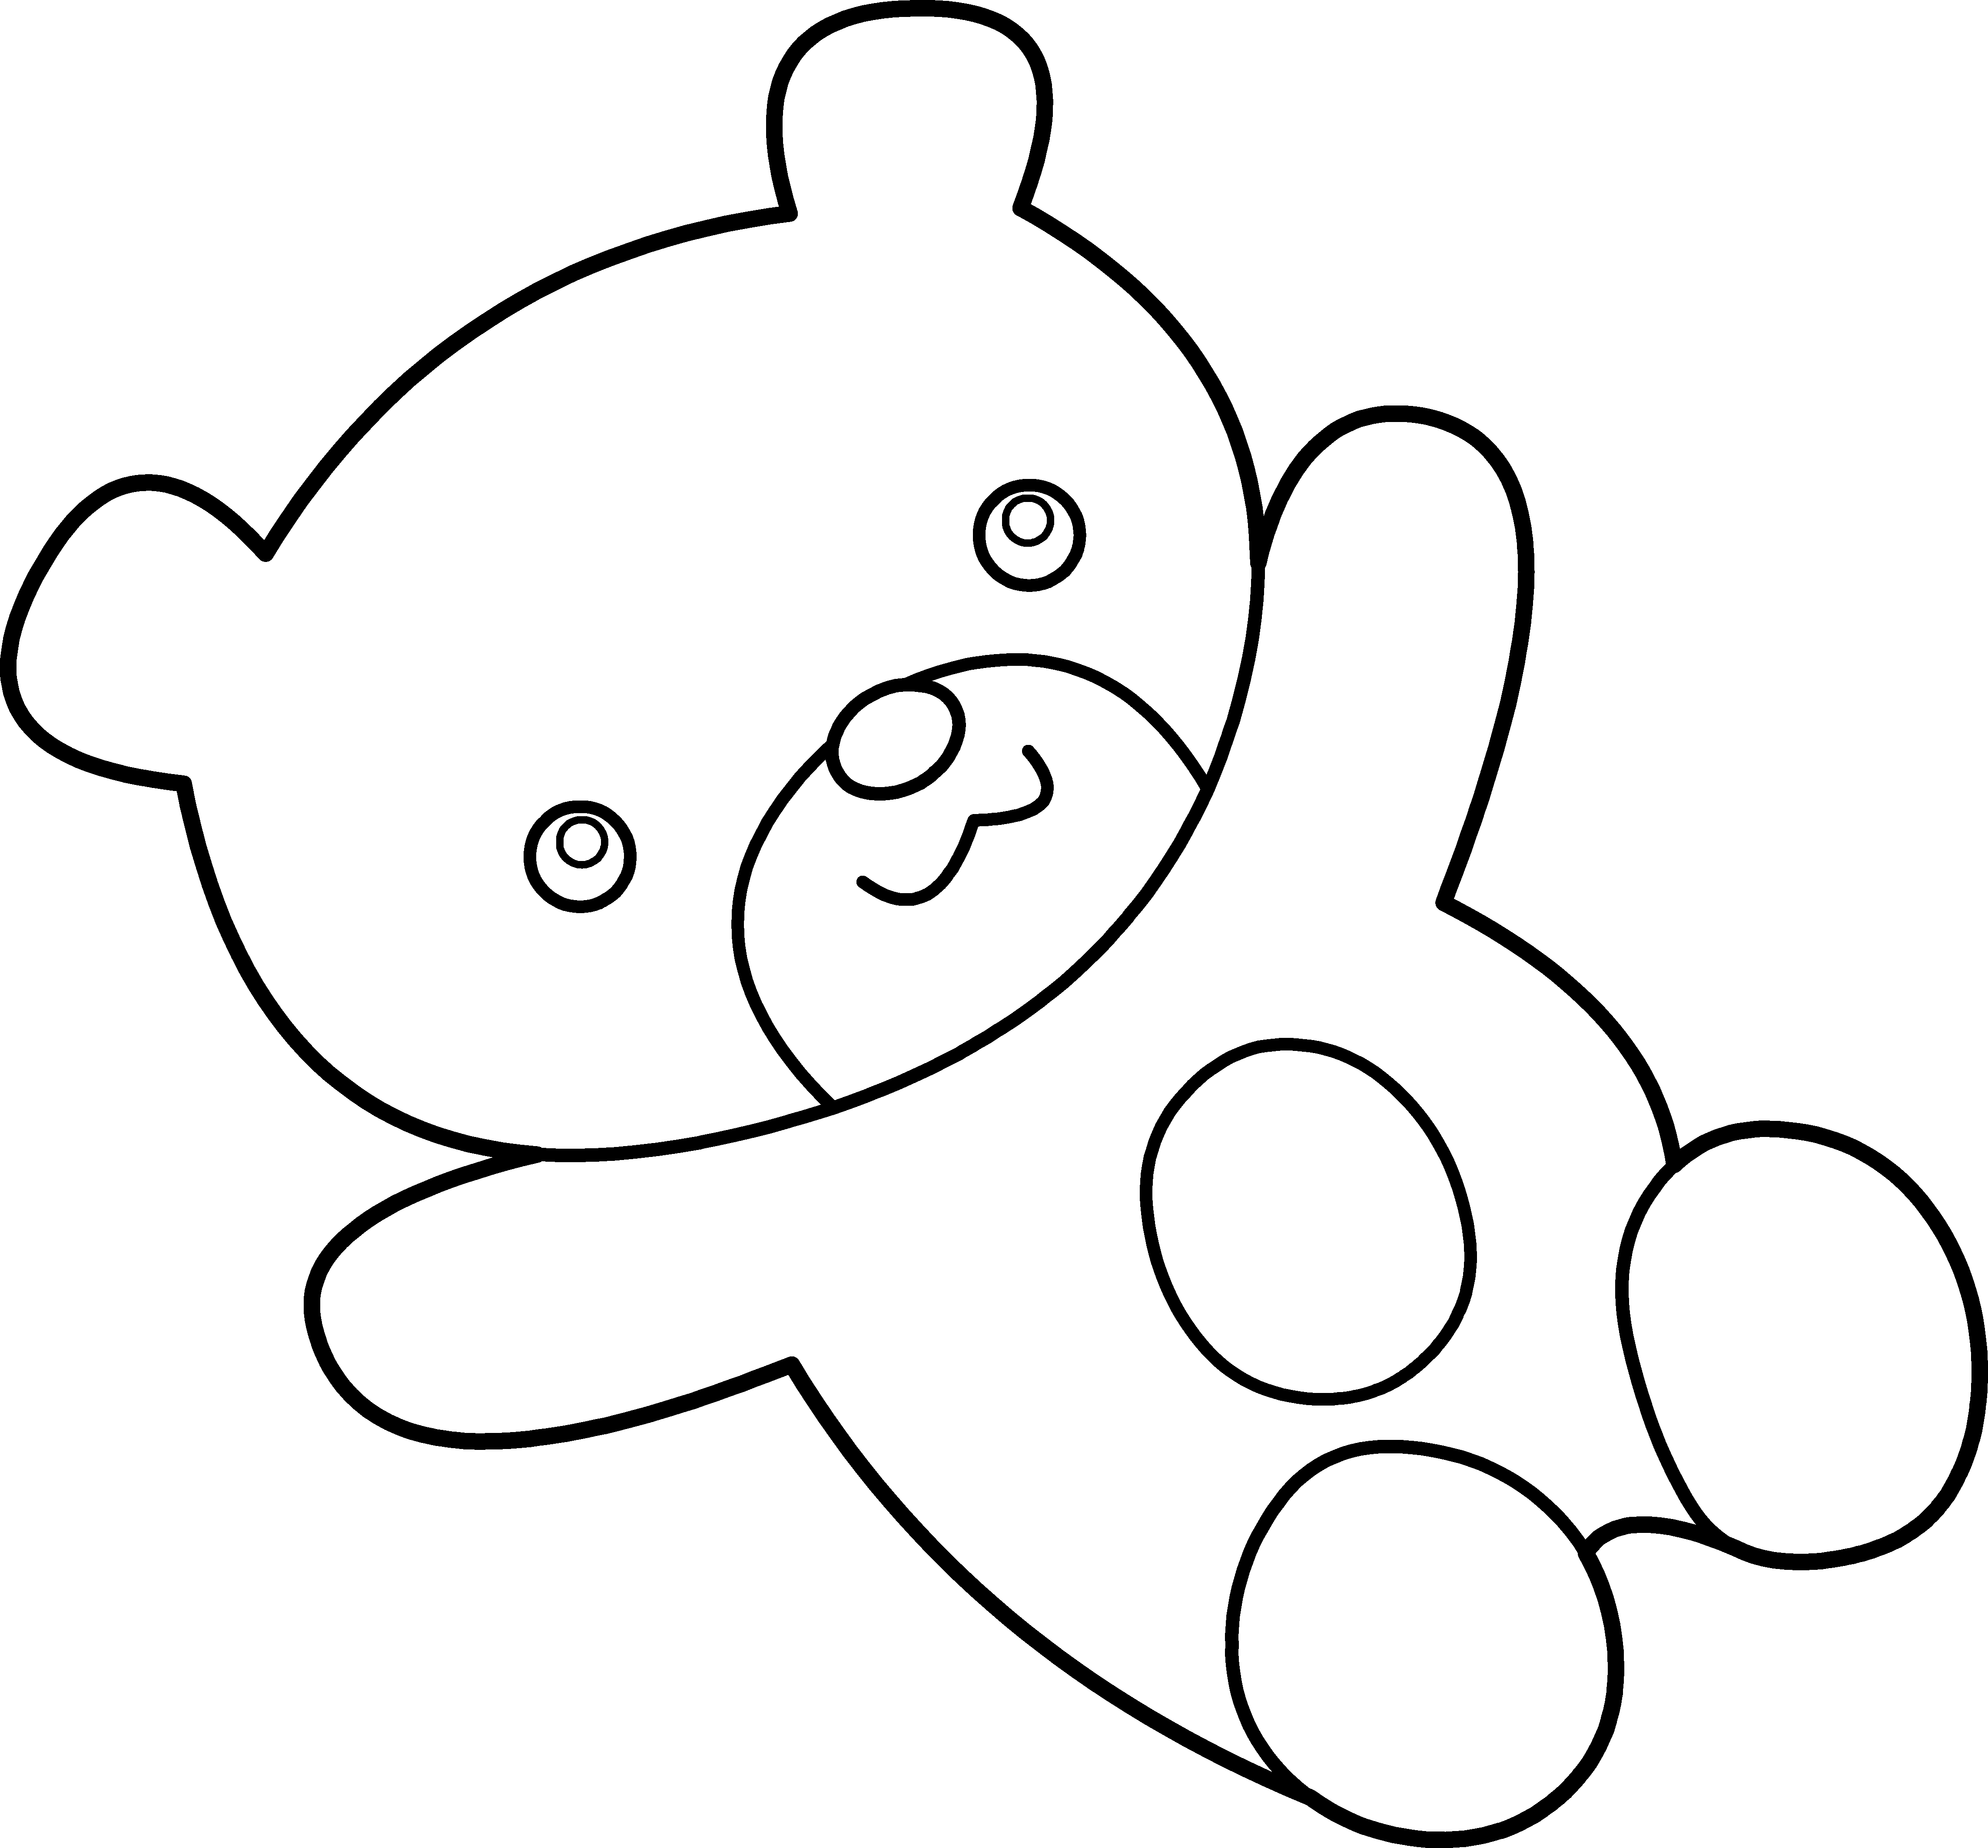 Cuddly Teddy Bear Coloring Page - Free Clip Art